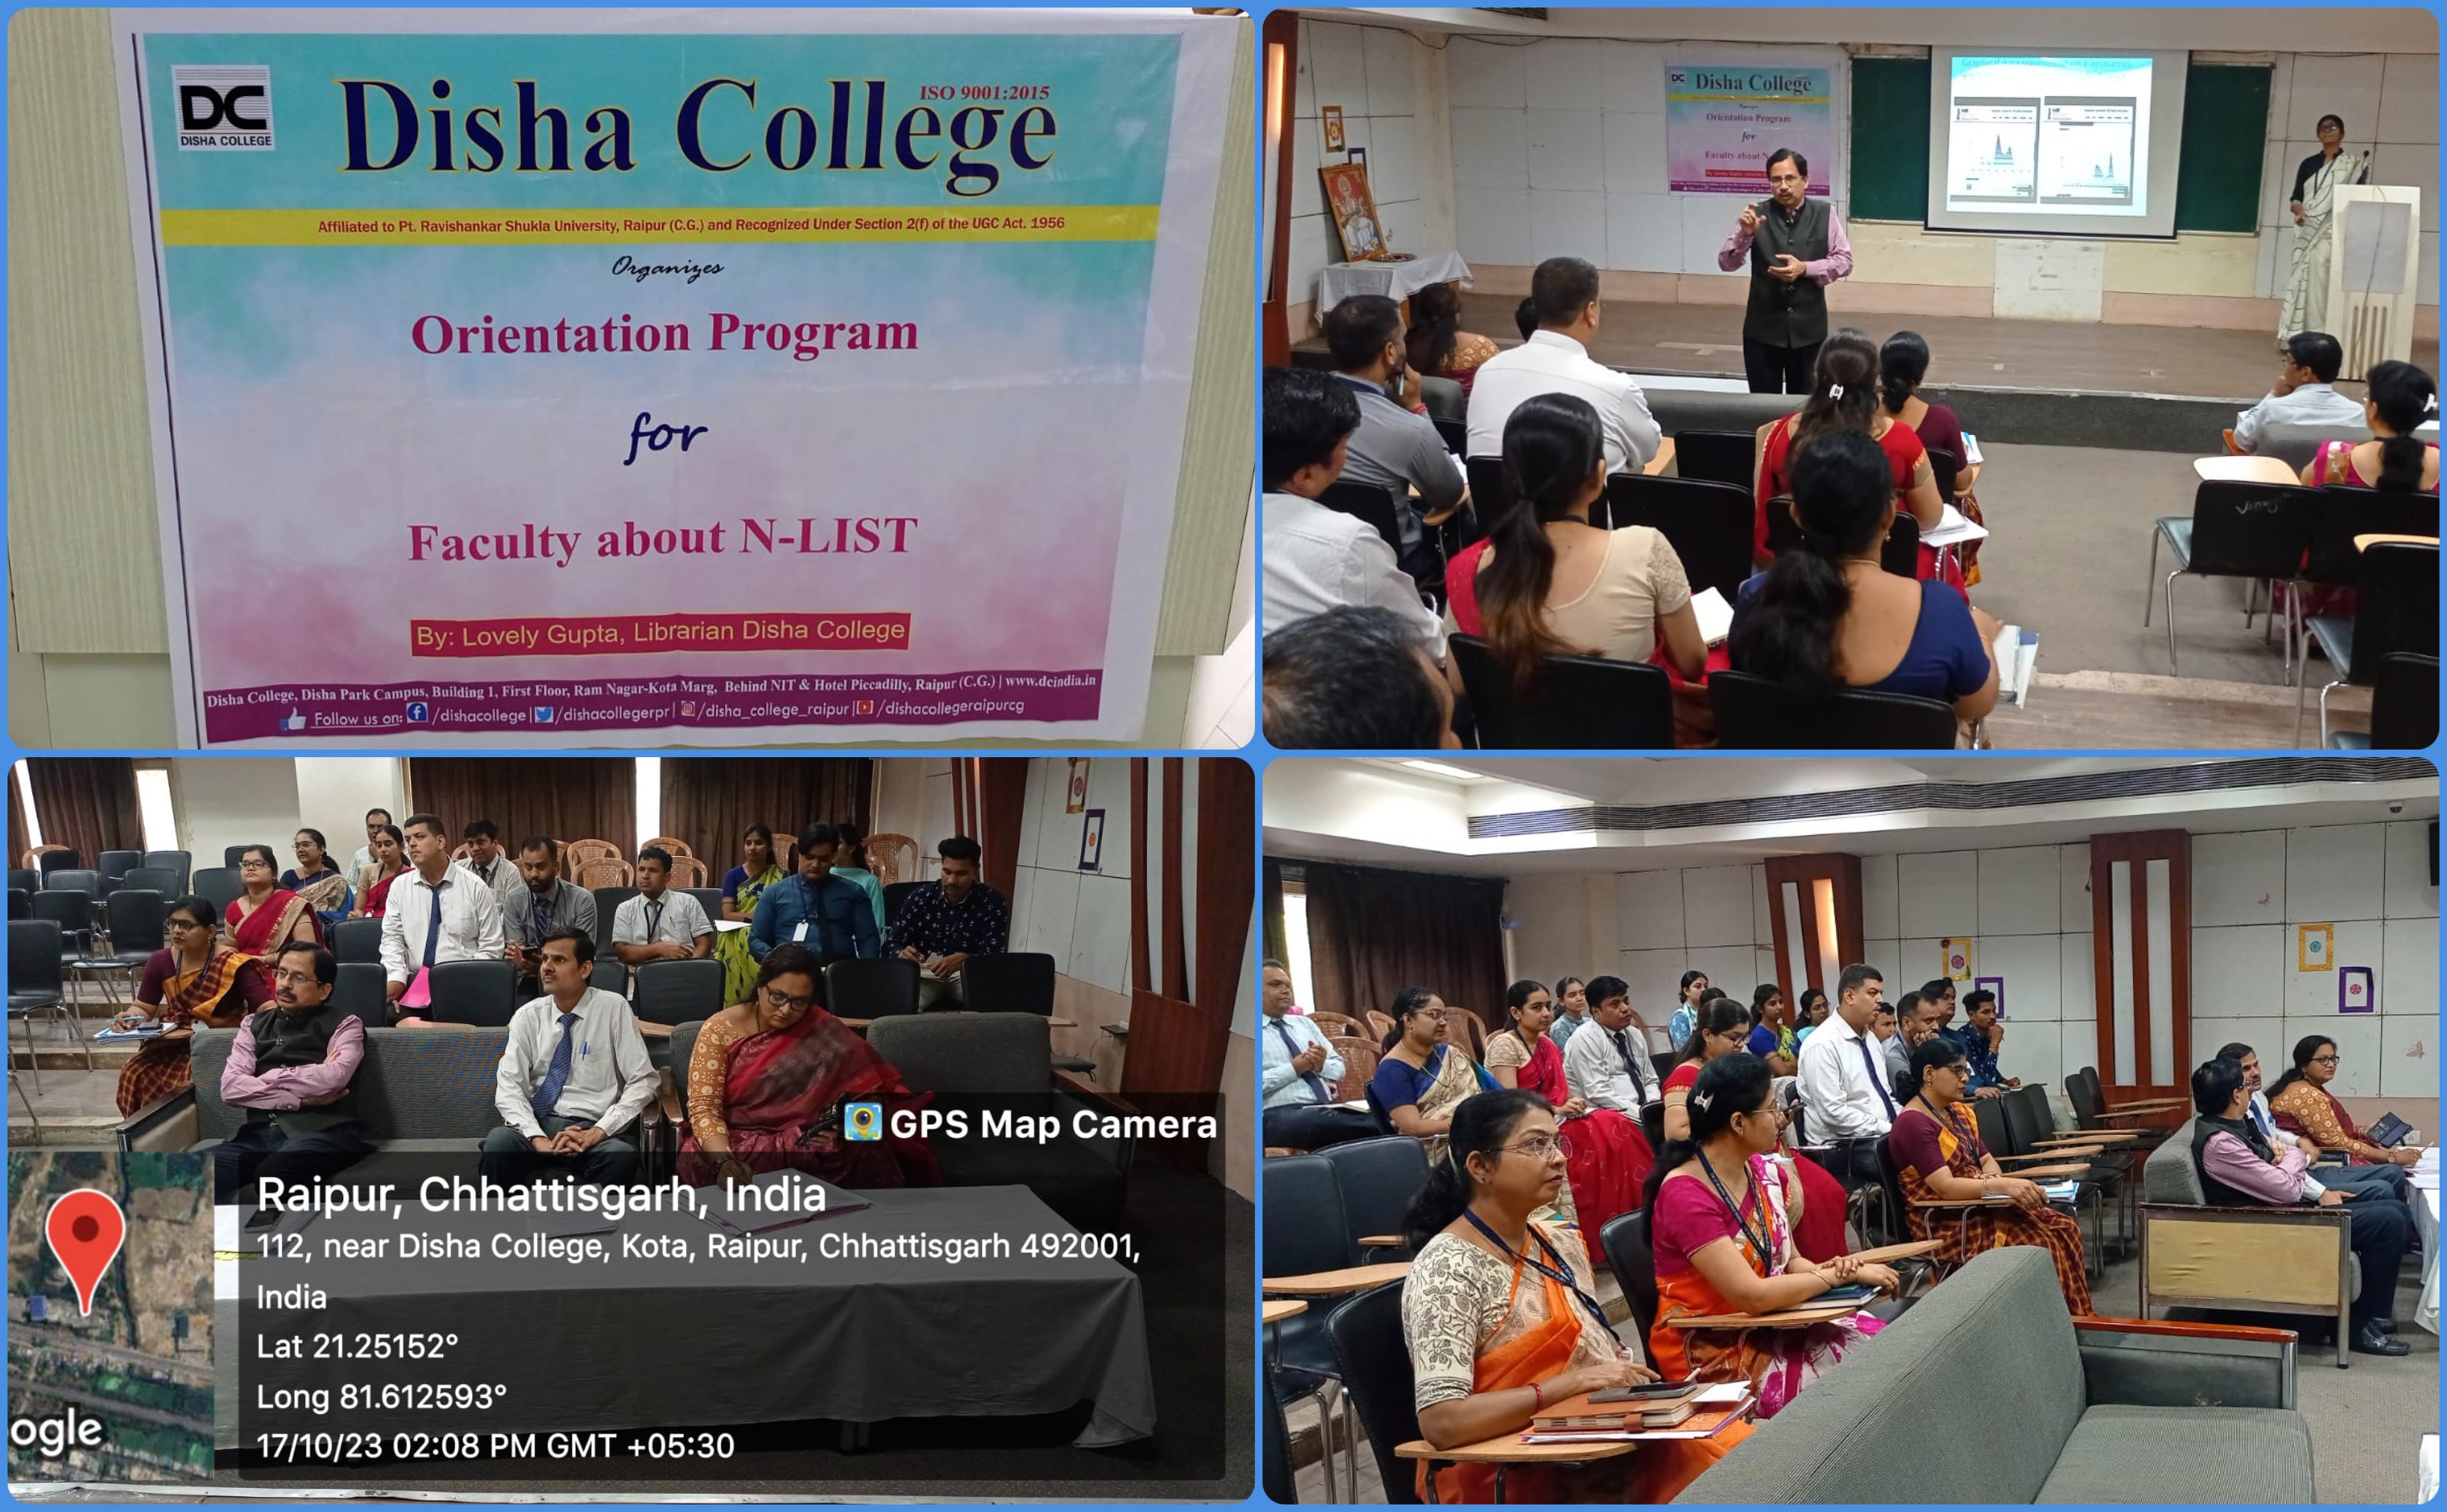 Orientation Program for Faculty about N-LIST